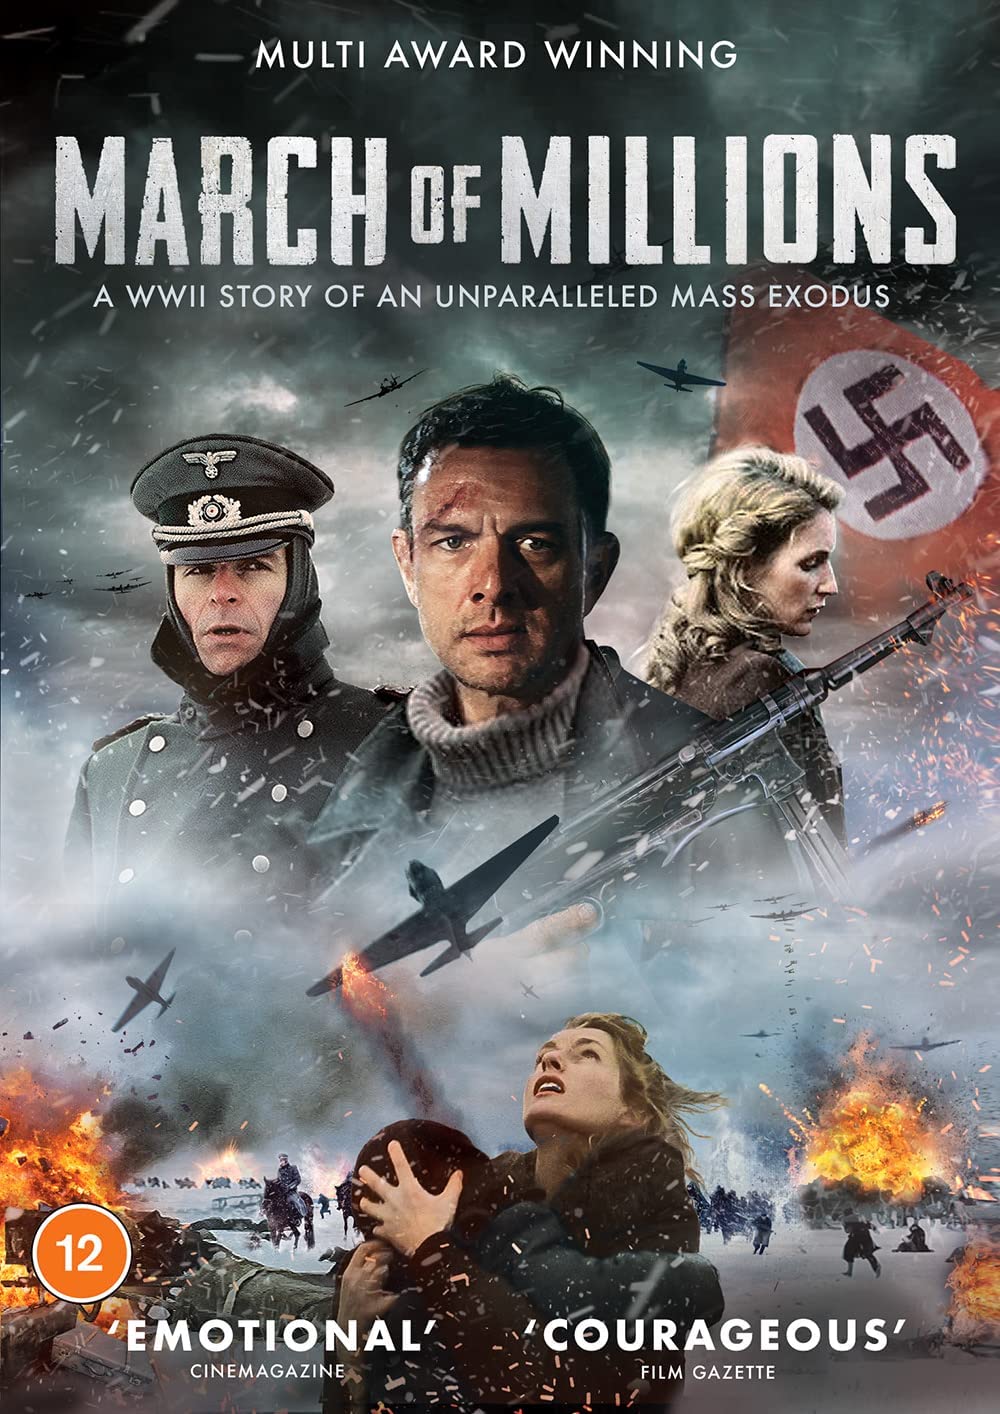 March of Millions - A WWII story of an unparalleled mass exodus (Multi Award Win - War/Action [DVD]